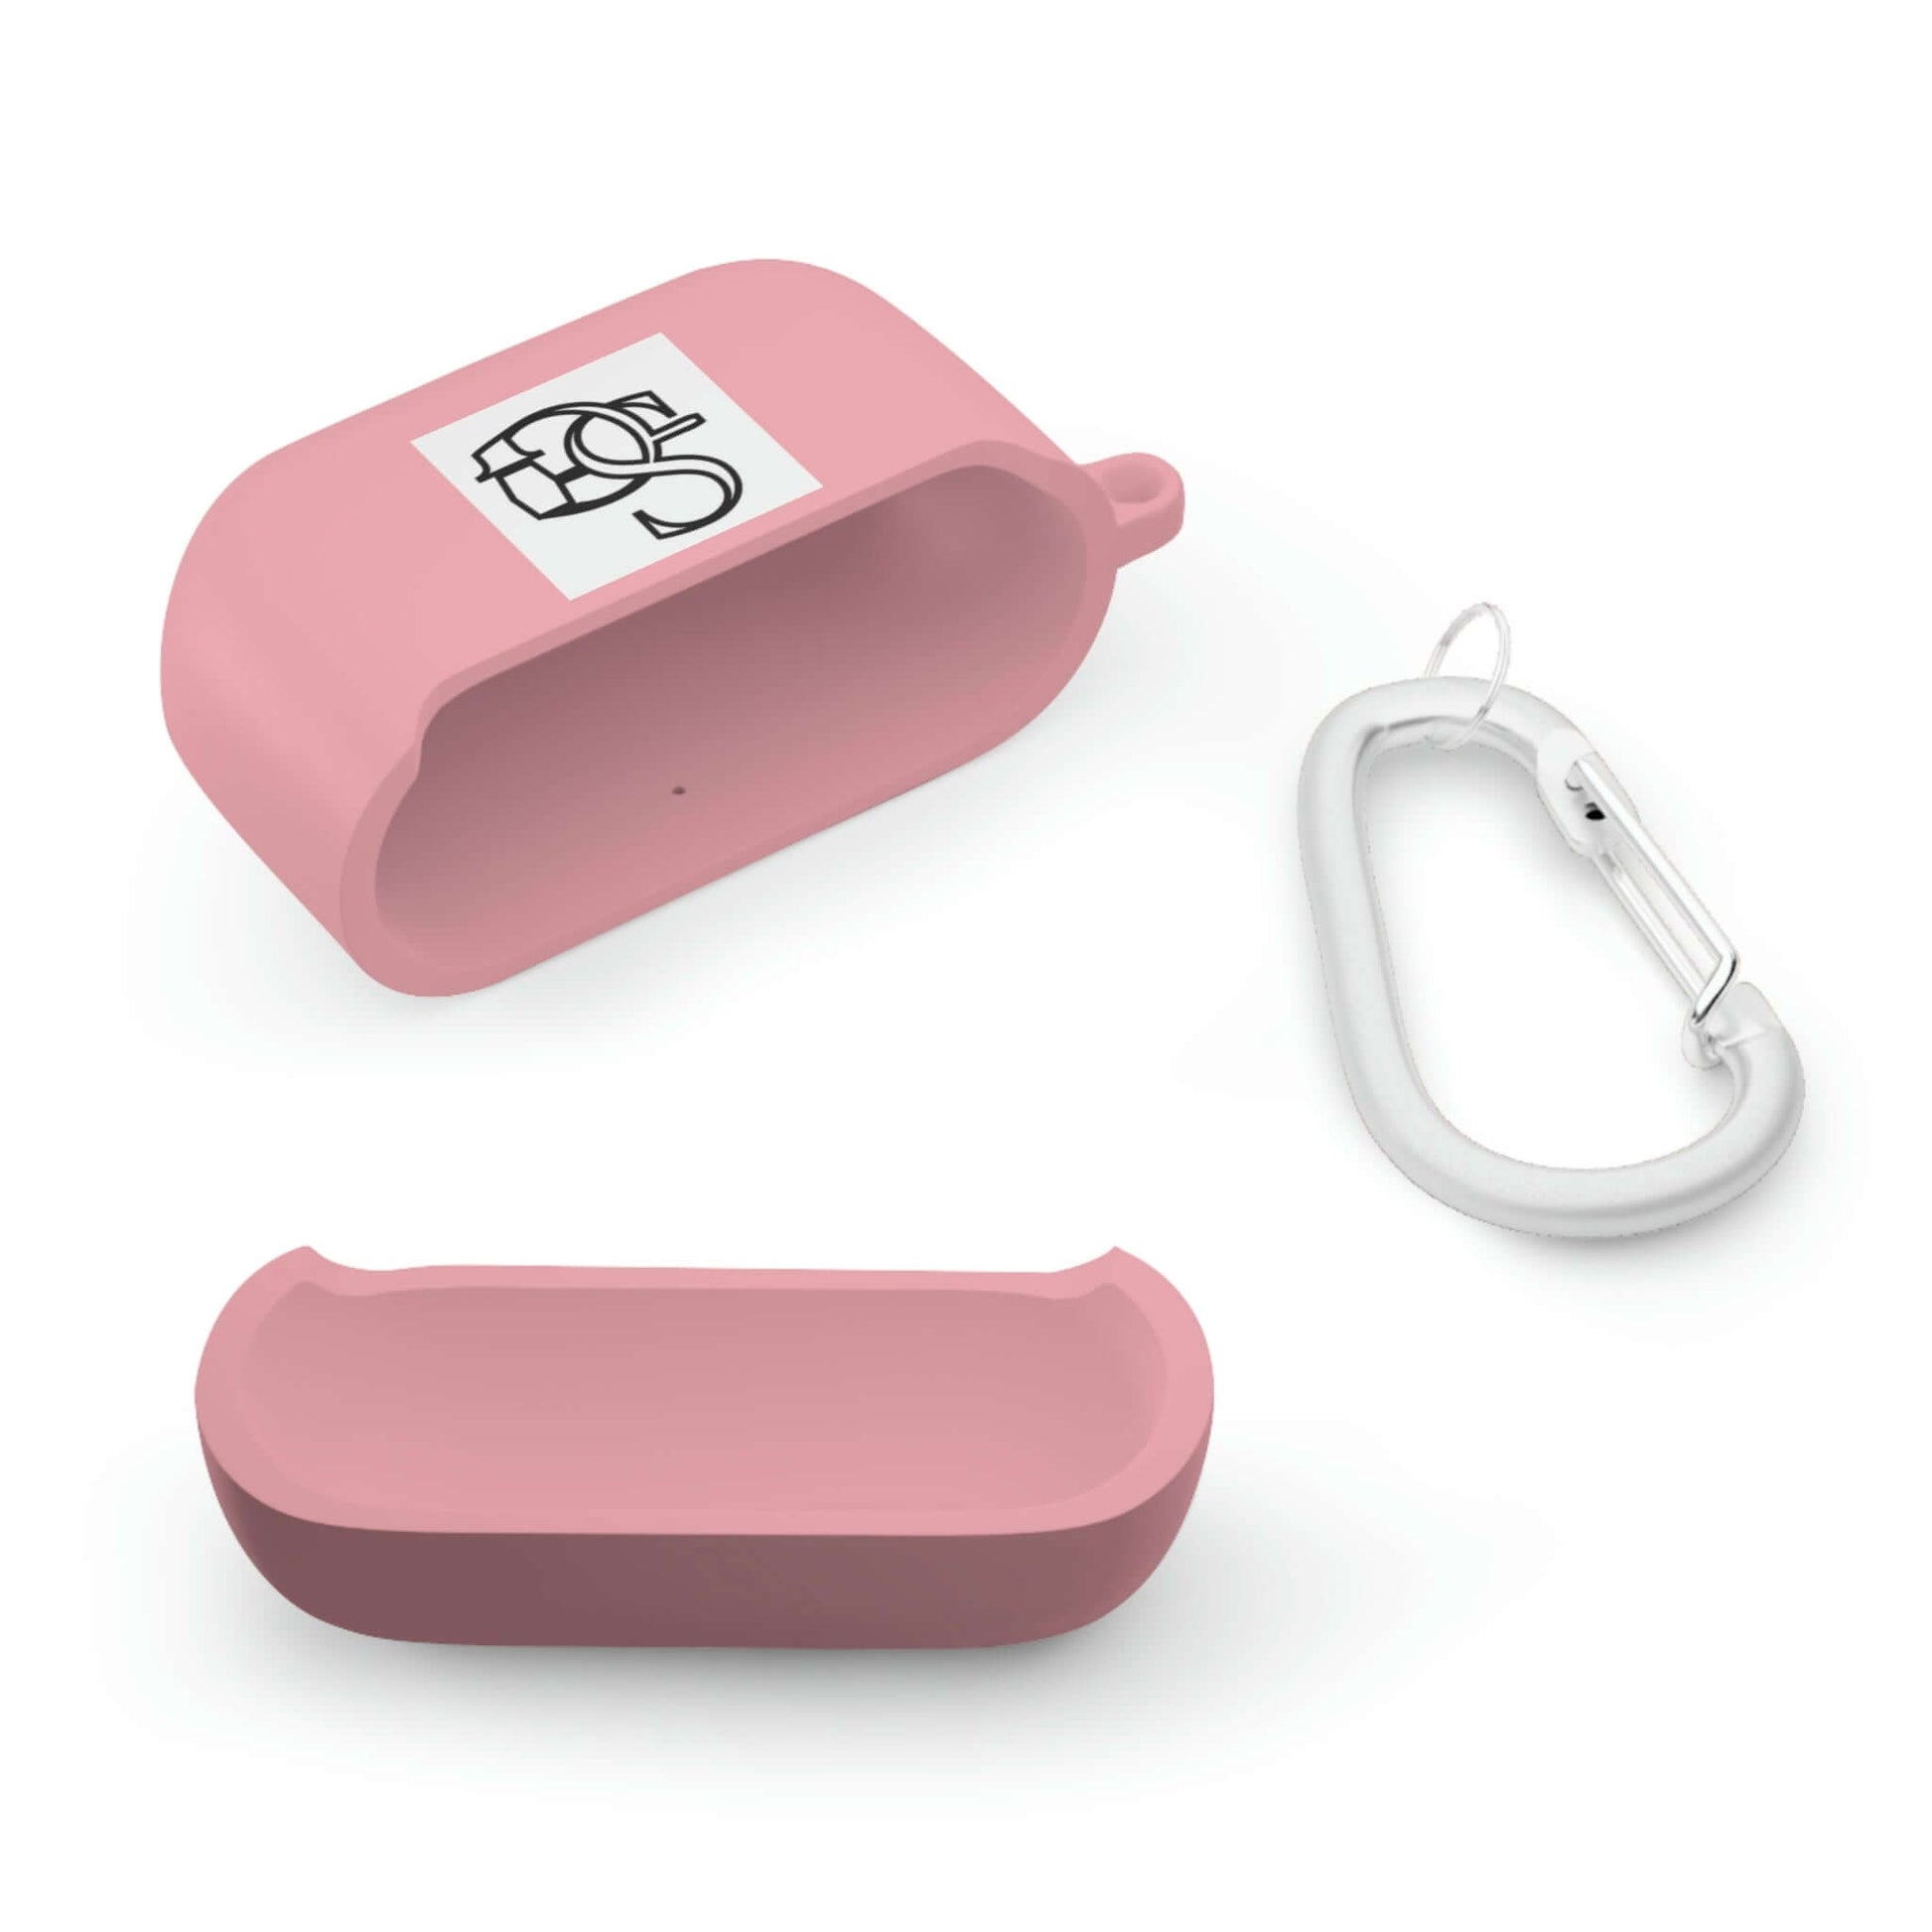 Air Pod Case with Pink cover with Six-Gen Forge Logo